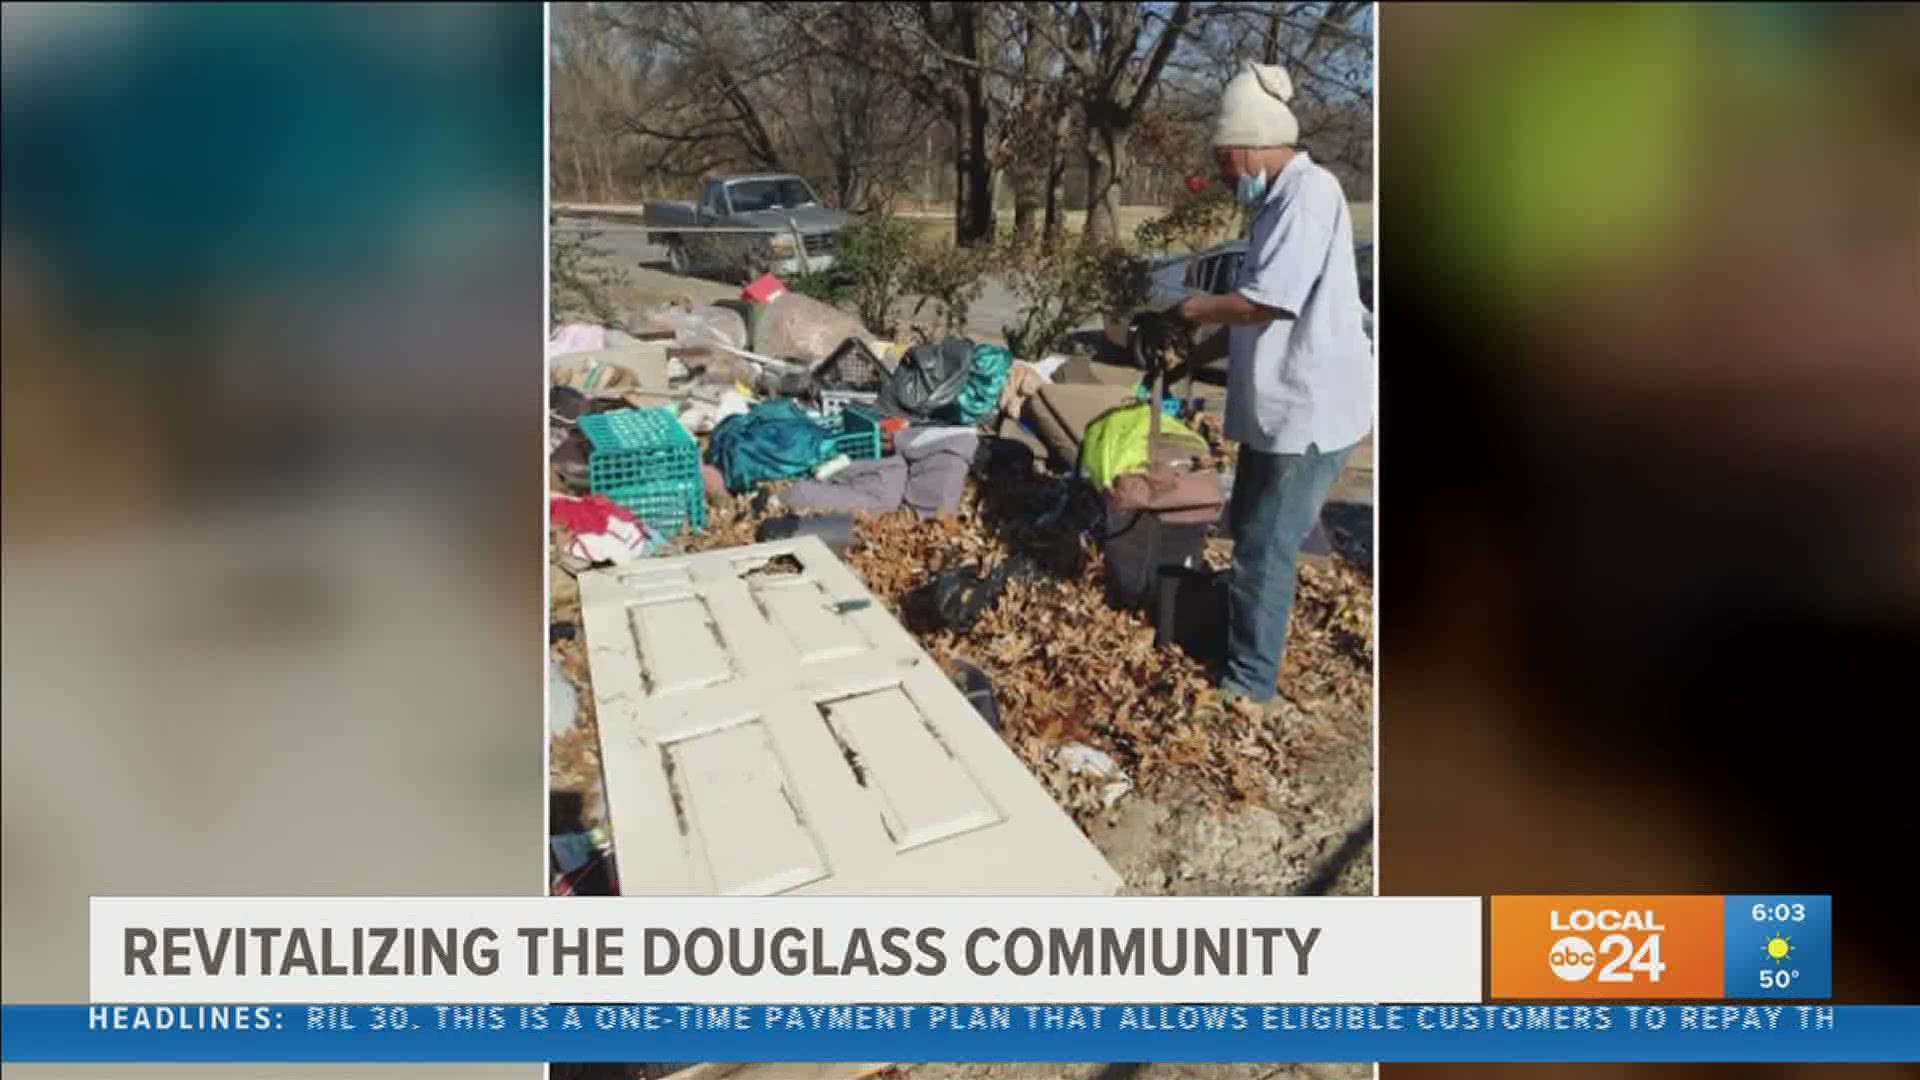 The Time is Now Douglass is working to return Douglass to its former glory